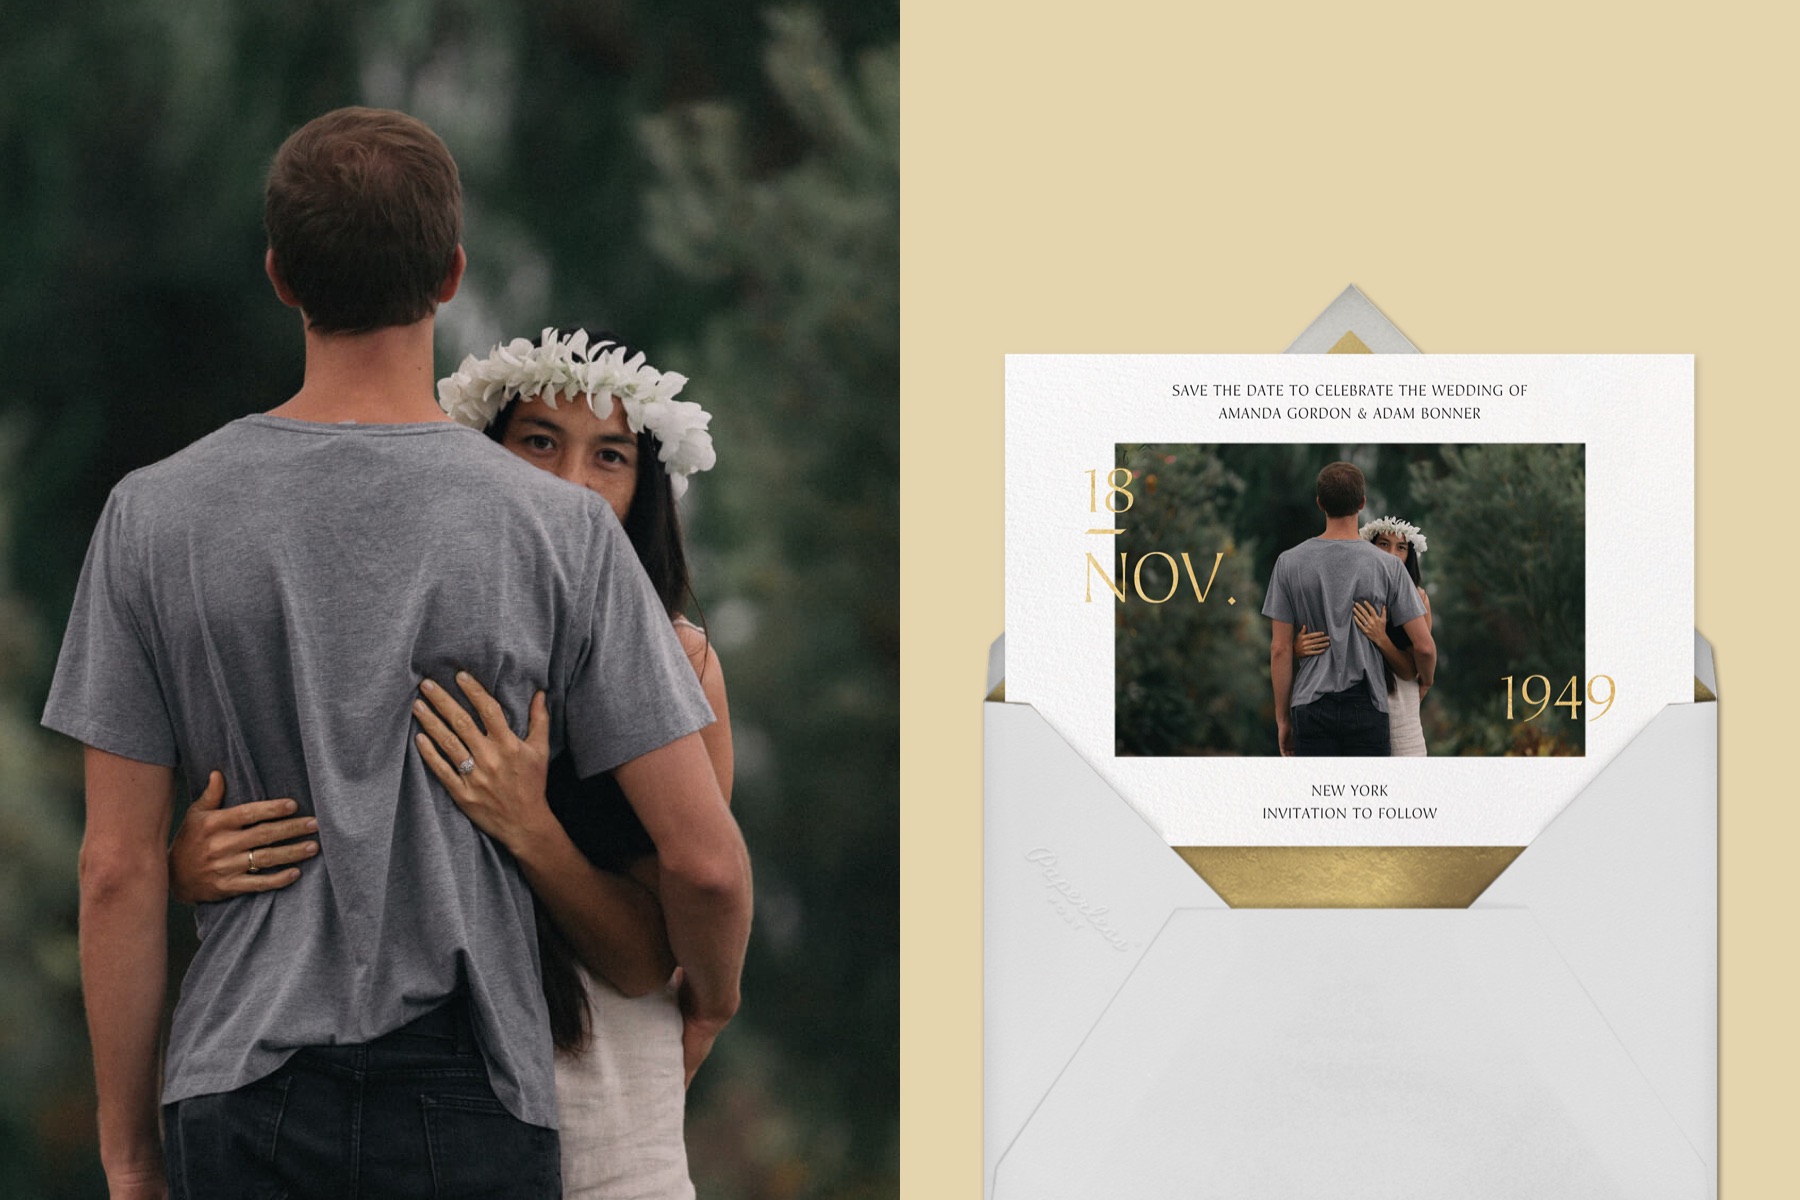 How to use photos in save the dates